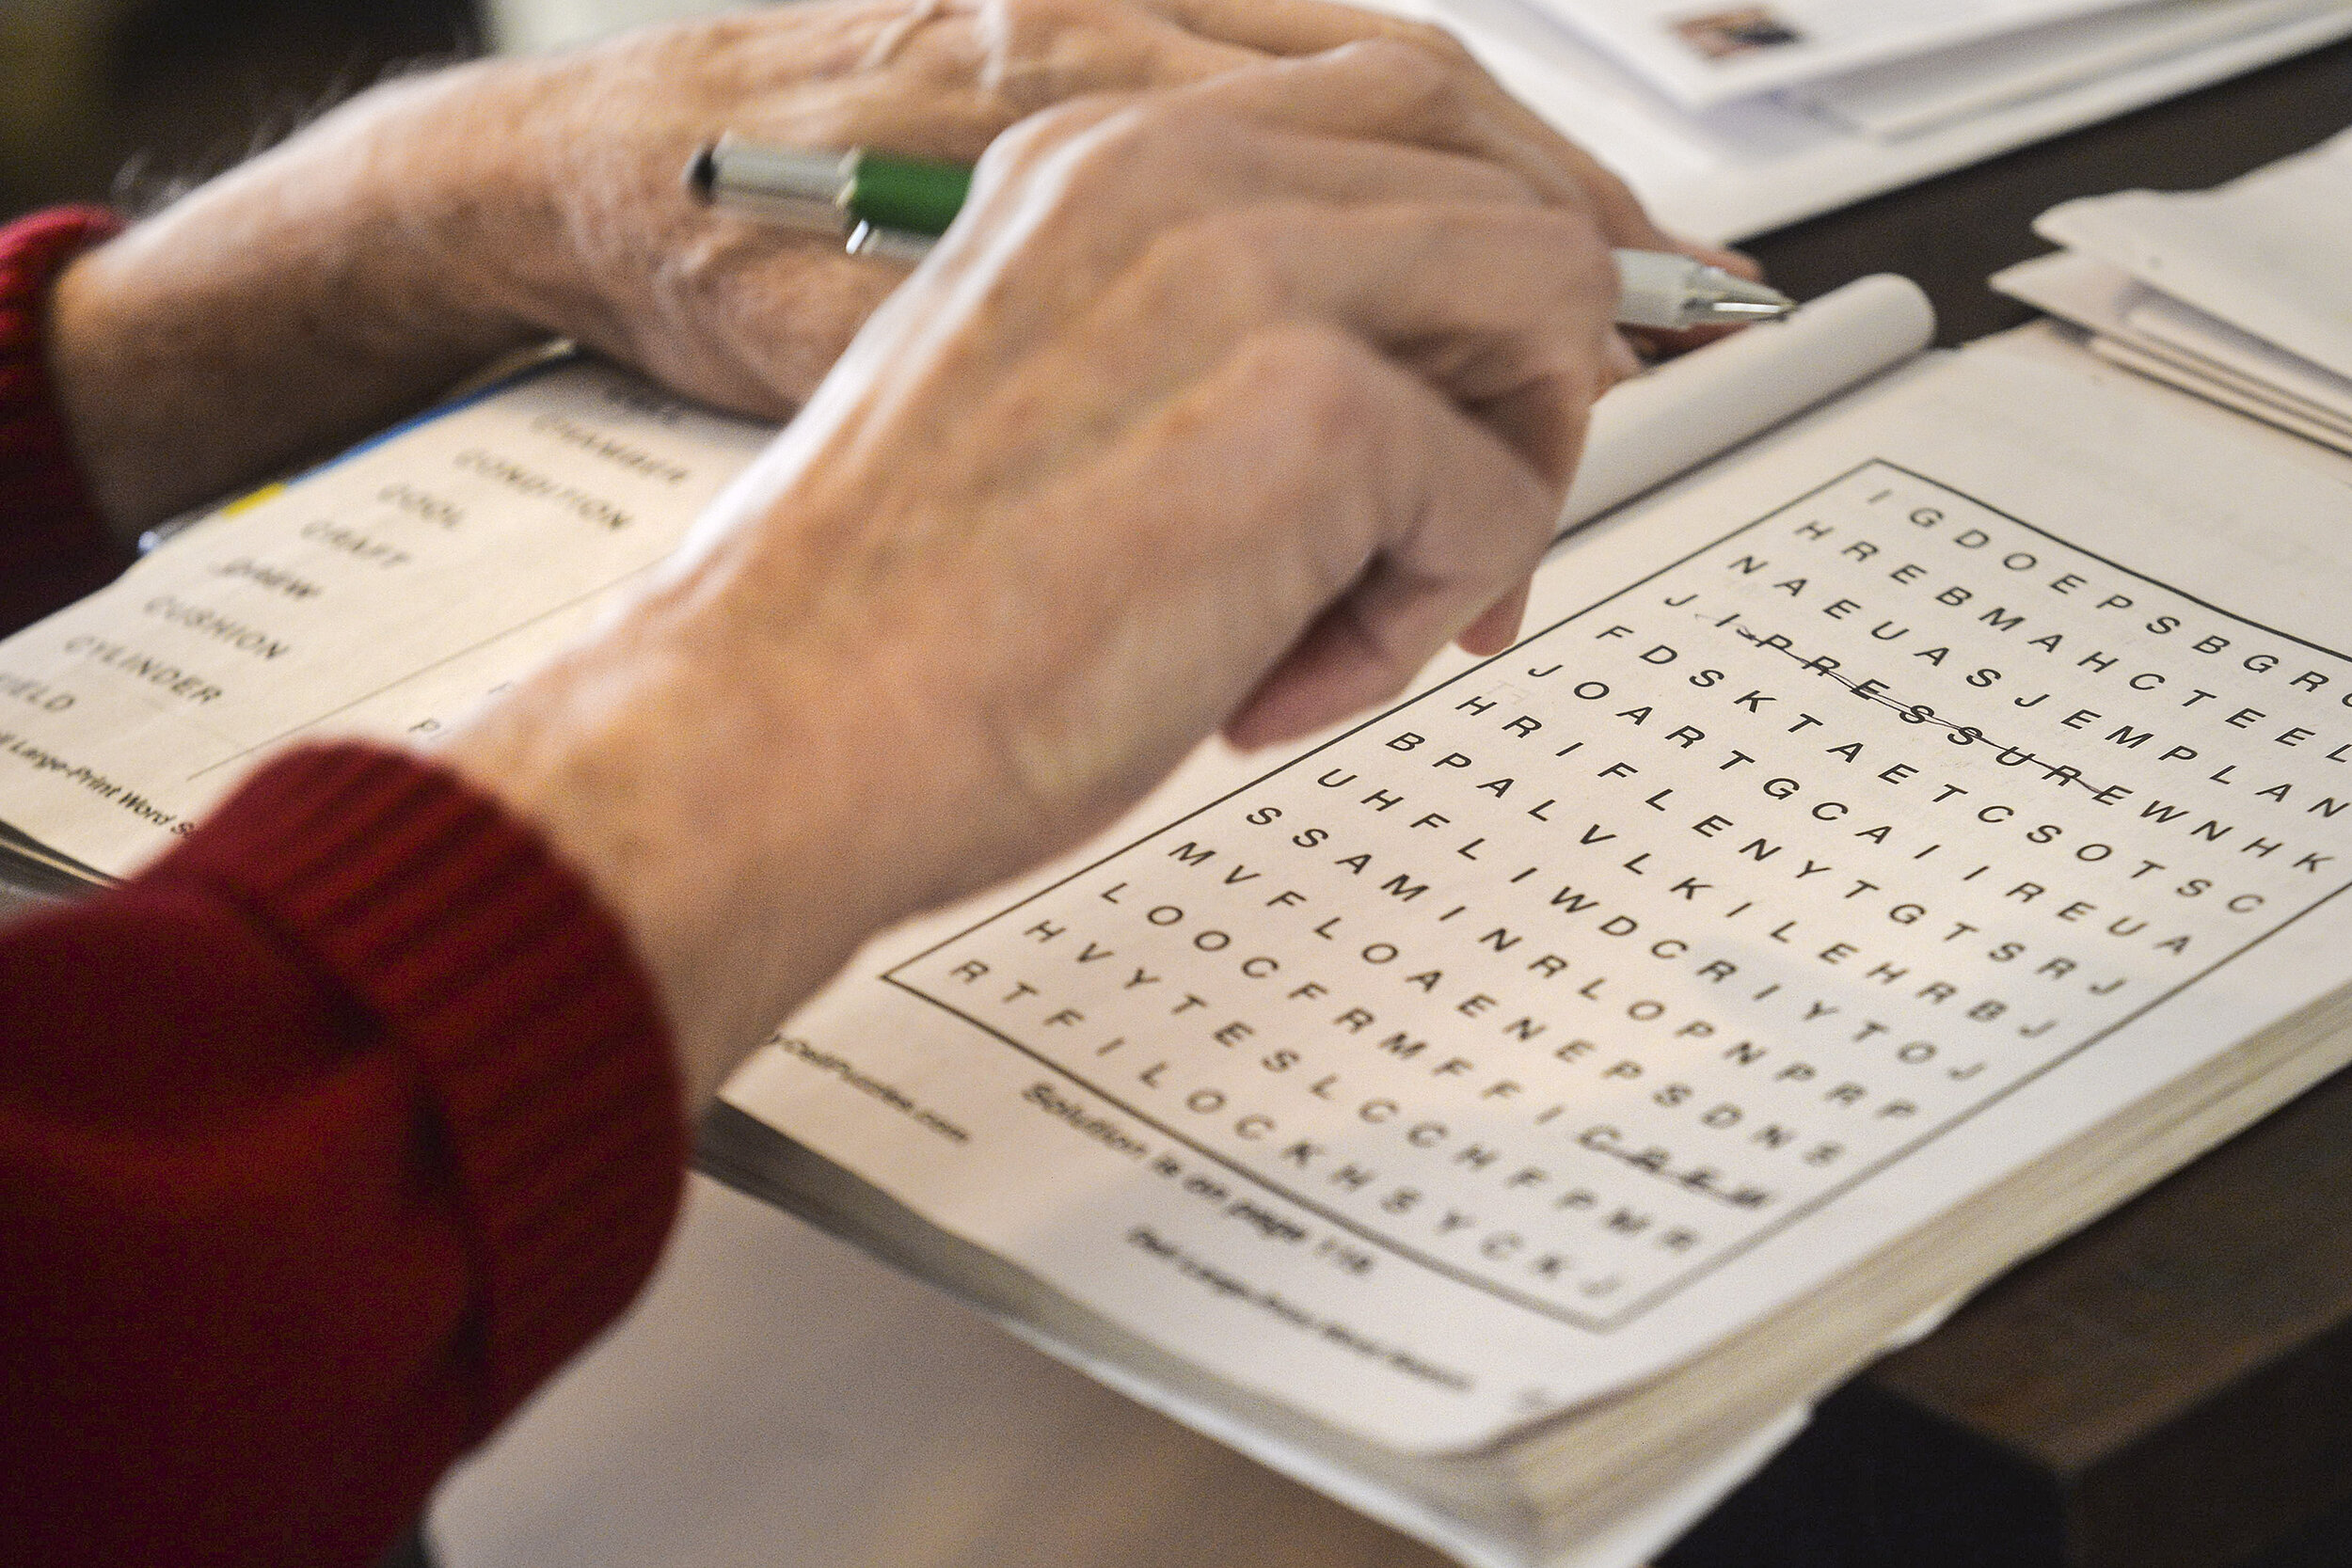  Rich Buchanan found the word “PRESSURE” while working a word search Friday, Feb. 2, 2018, at his home in Bloomington, Illinois. 